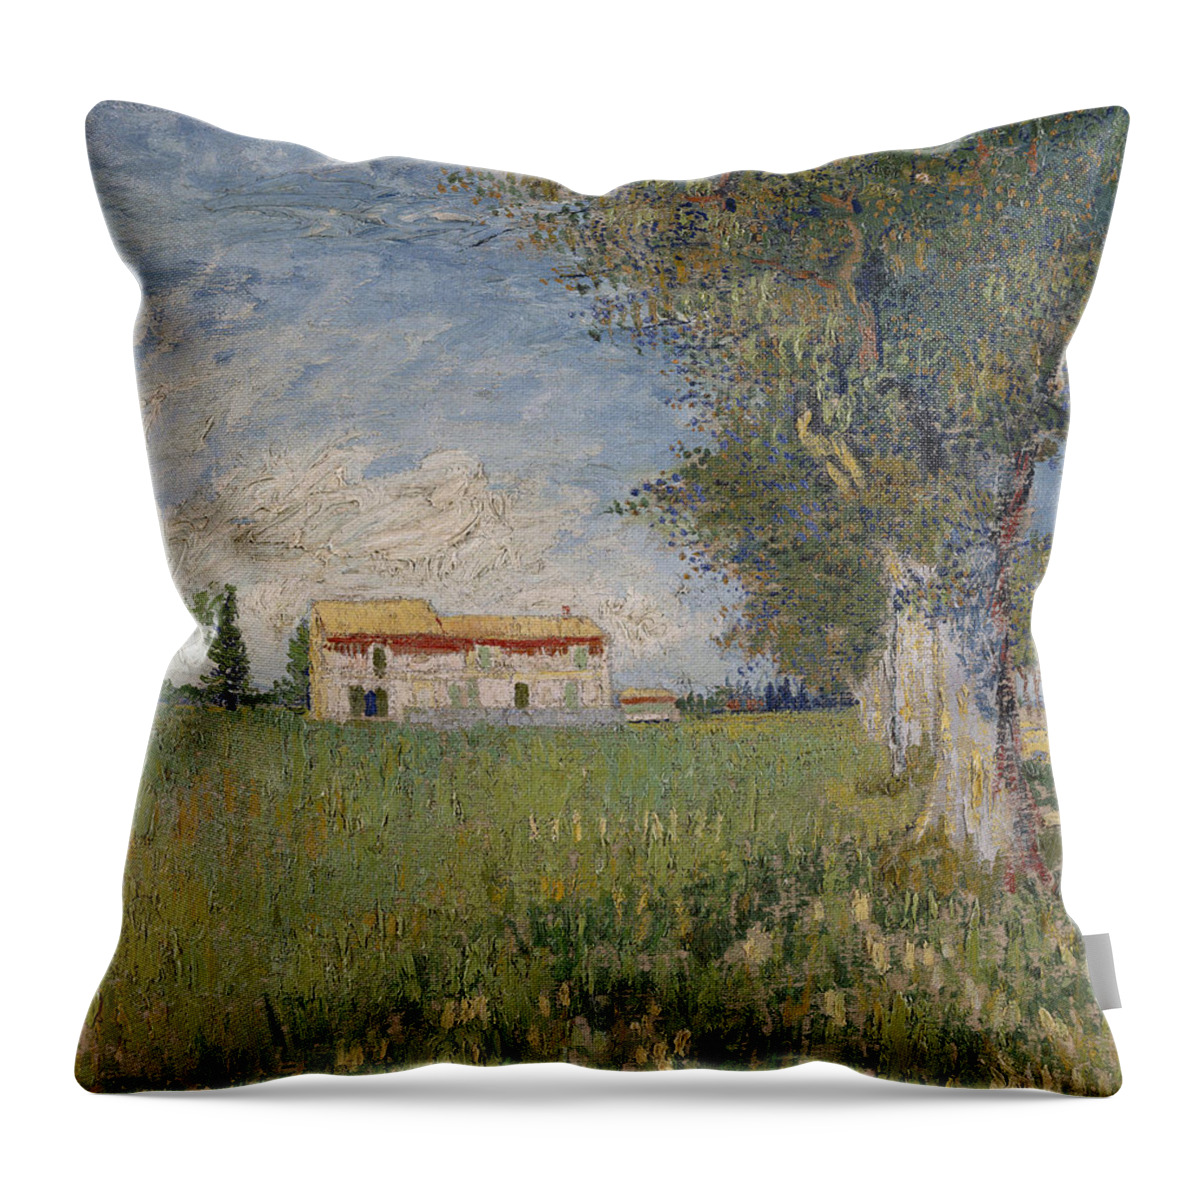 Vincent Van Gogh Throw Pillow featuring the painting Farmhouse In A Wheat Field #3 by Vincent Van Gogh